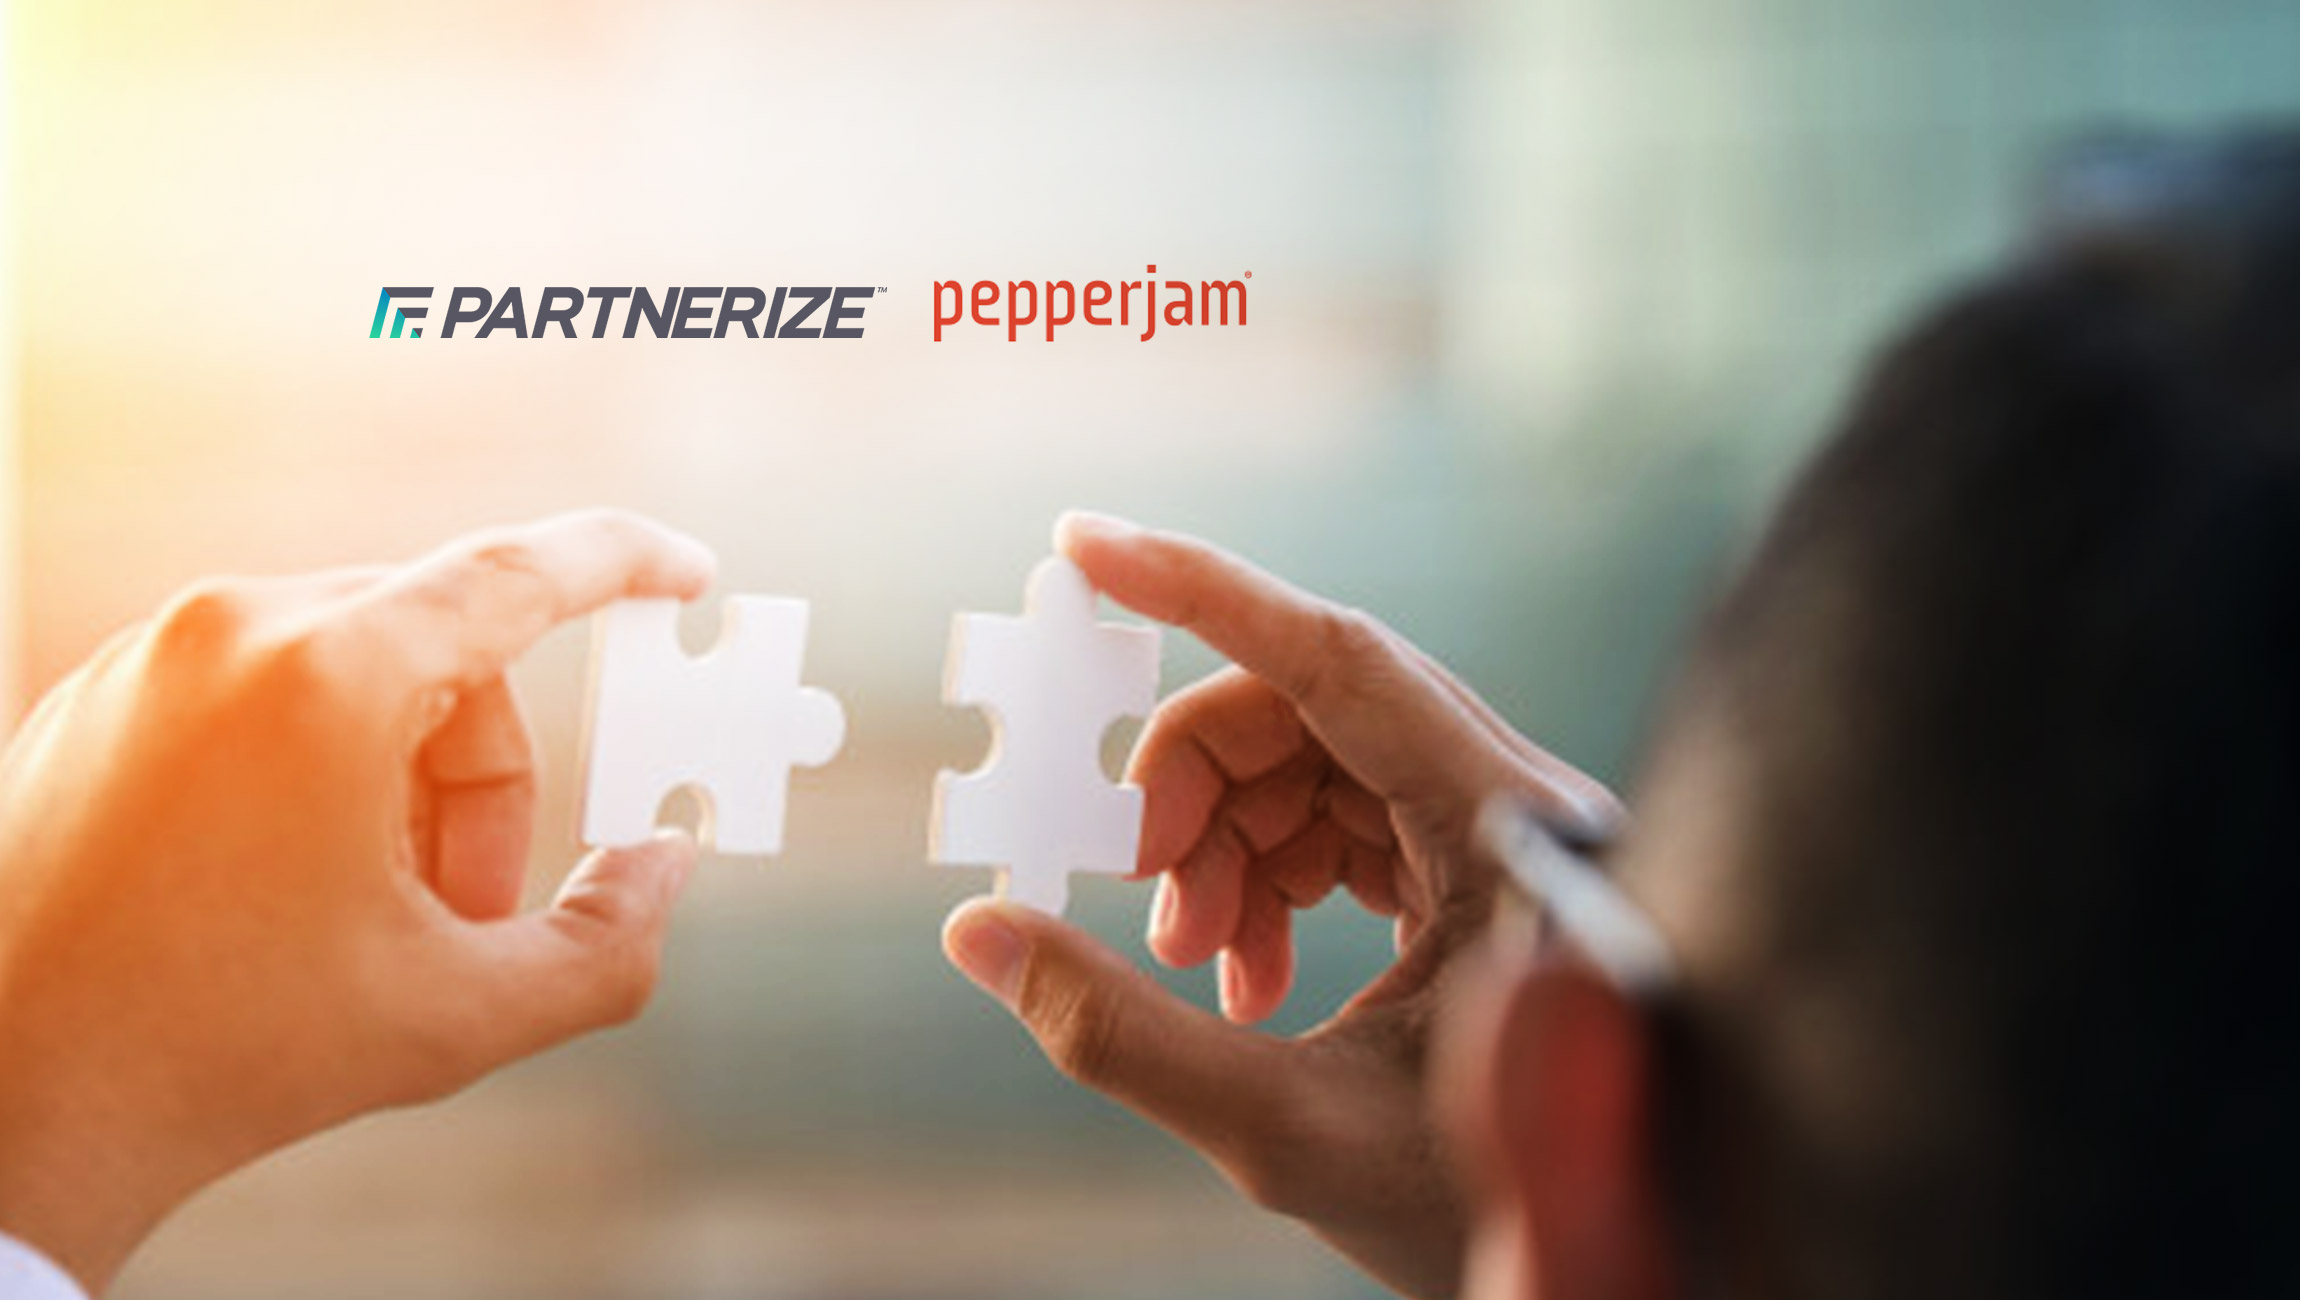 Partnerize Acquires Pepperjam to Rapidly Accelerate Adoption of Partnership Management Globally